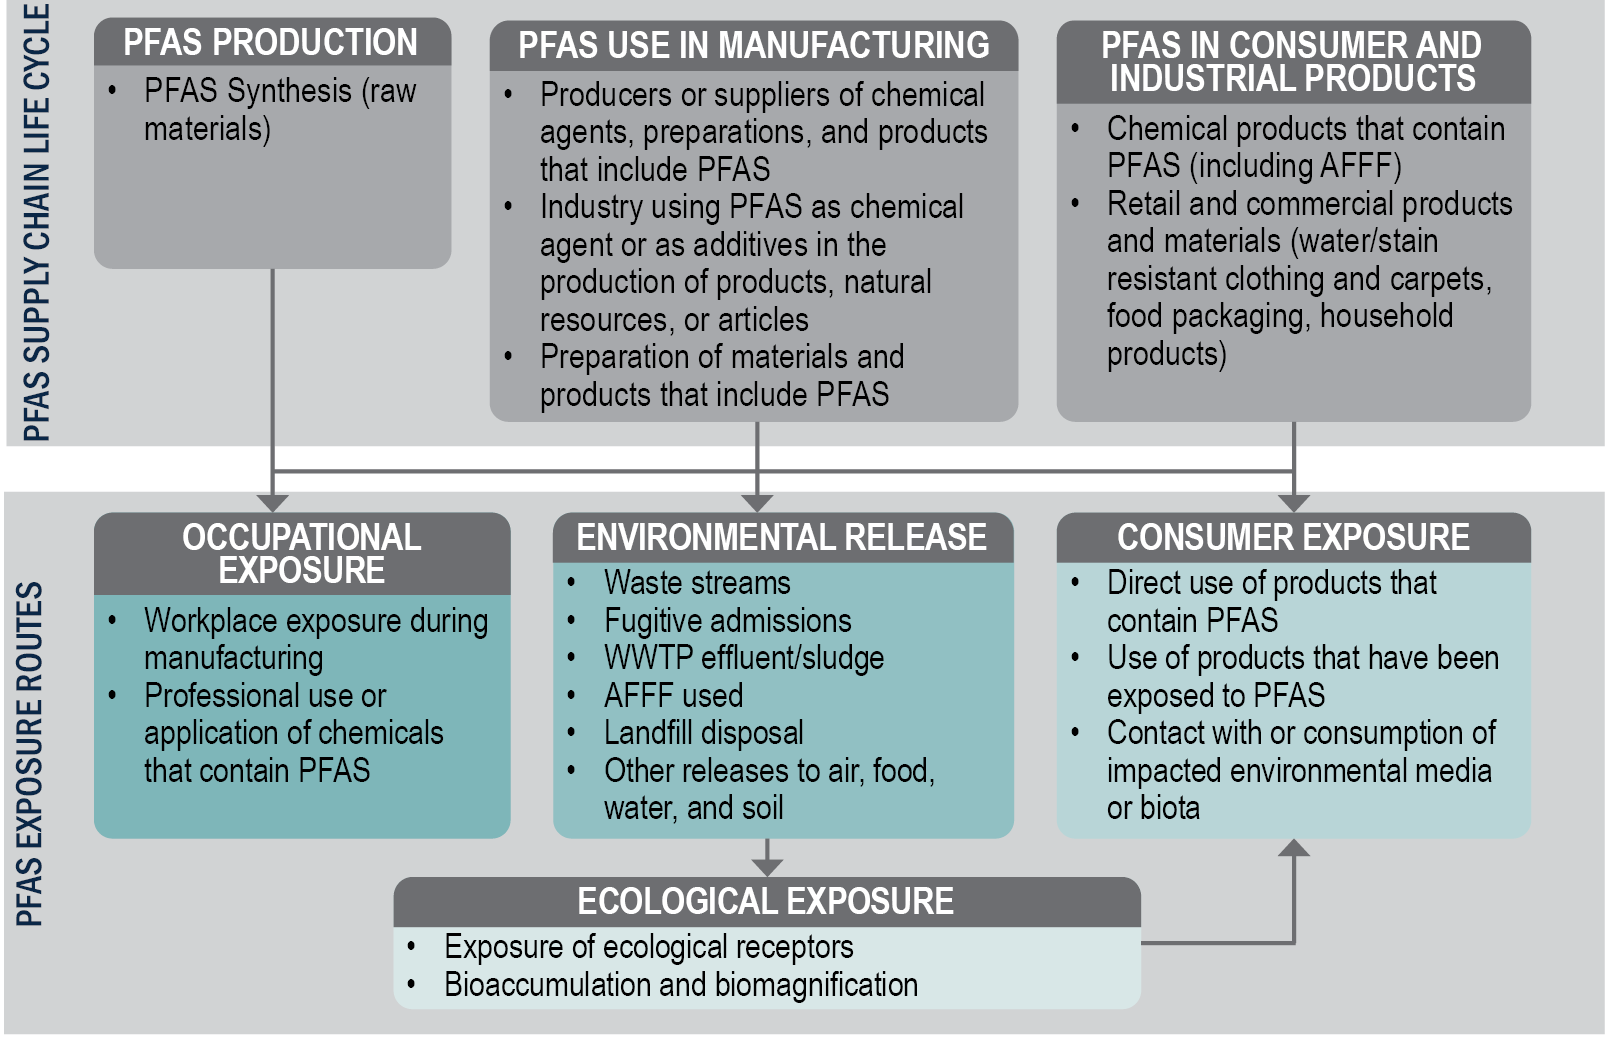 Flow chart describing the lifecycle of PFAS used in production, manufacturing, and consumer products, leading to occupational exposure, environmental release, and consumer and ecological exposure.